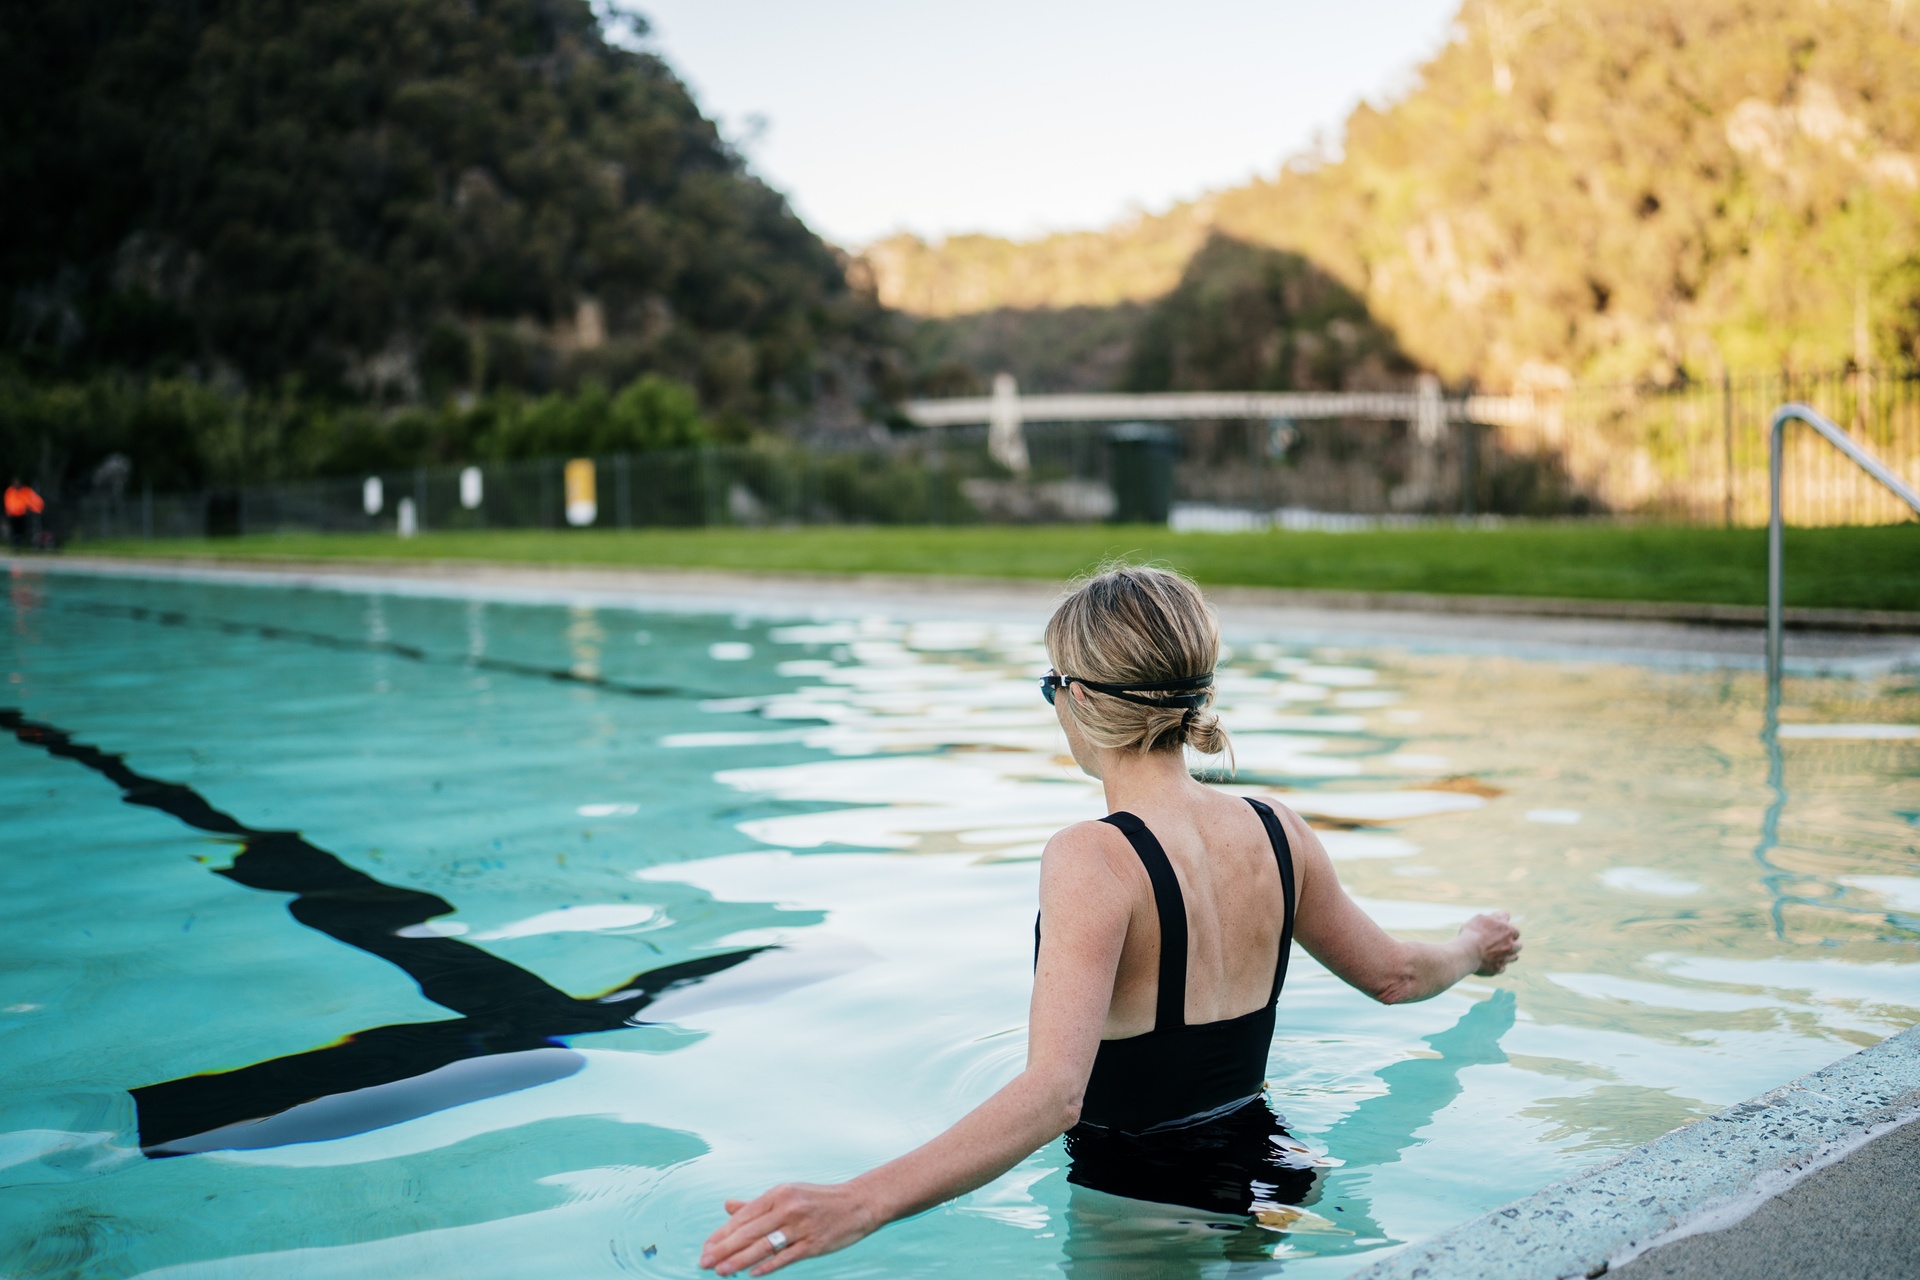 A female swimmer standing in the pool at the Launceston Gorge. She has blonde hair tied in a bun and her arms open just touching the water. The Suspension Bridge can be seen in the distance.